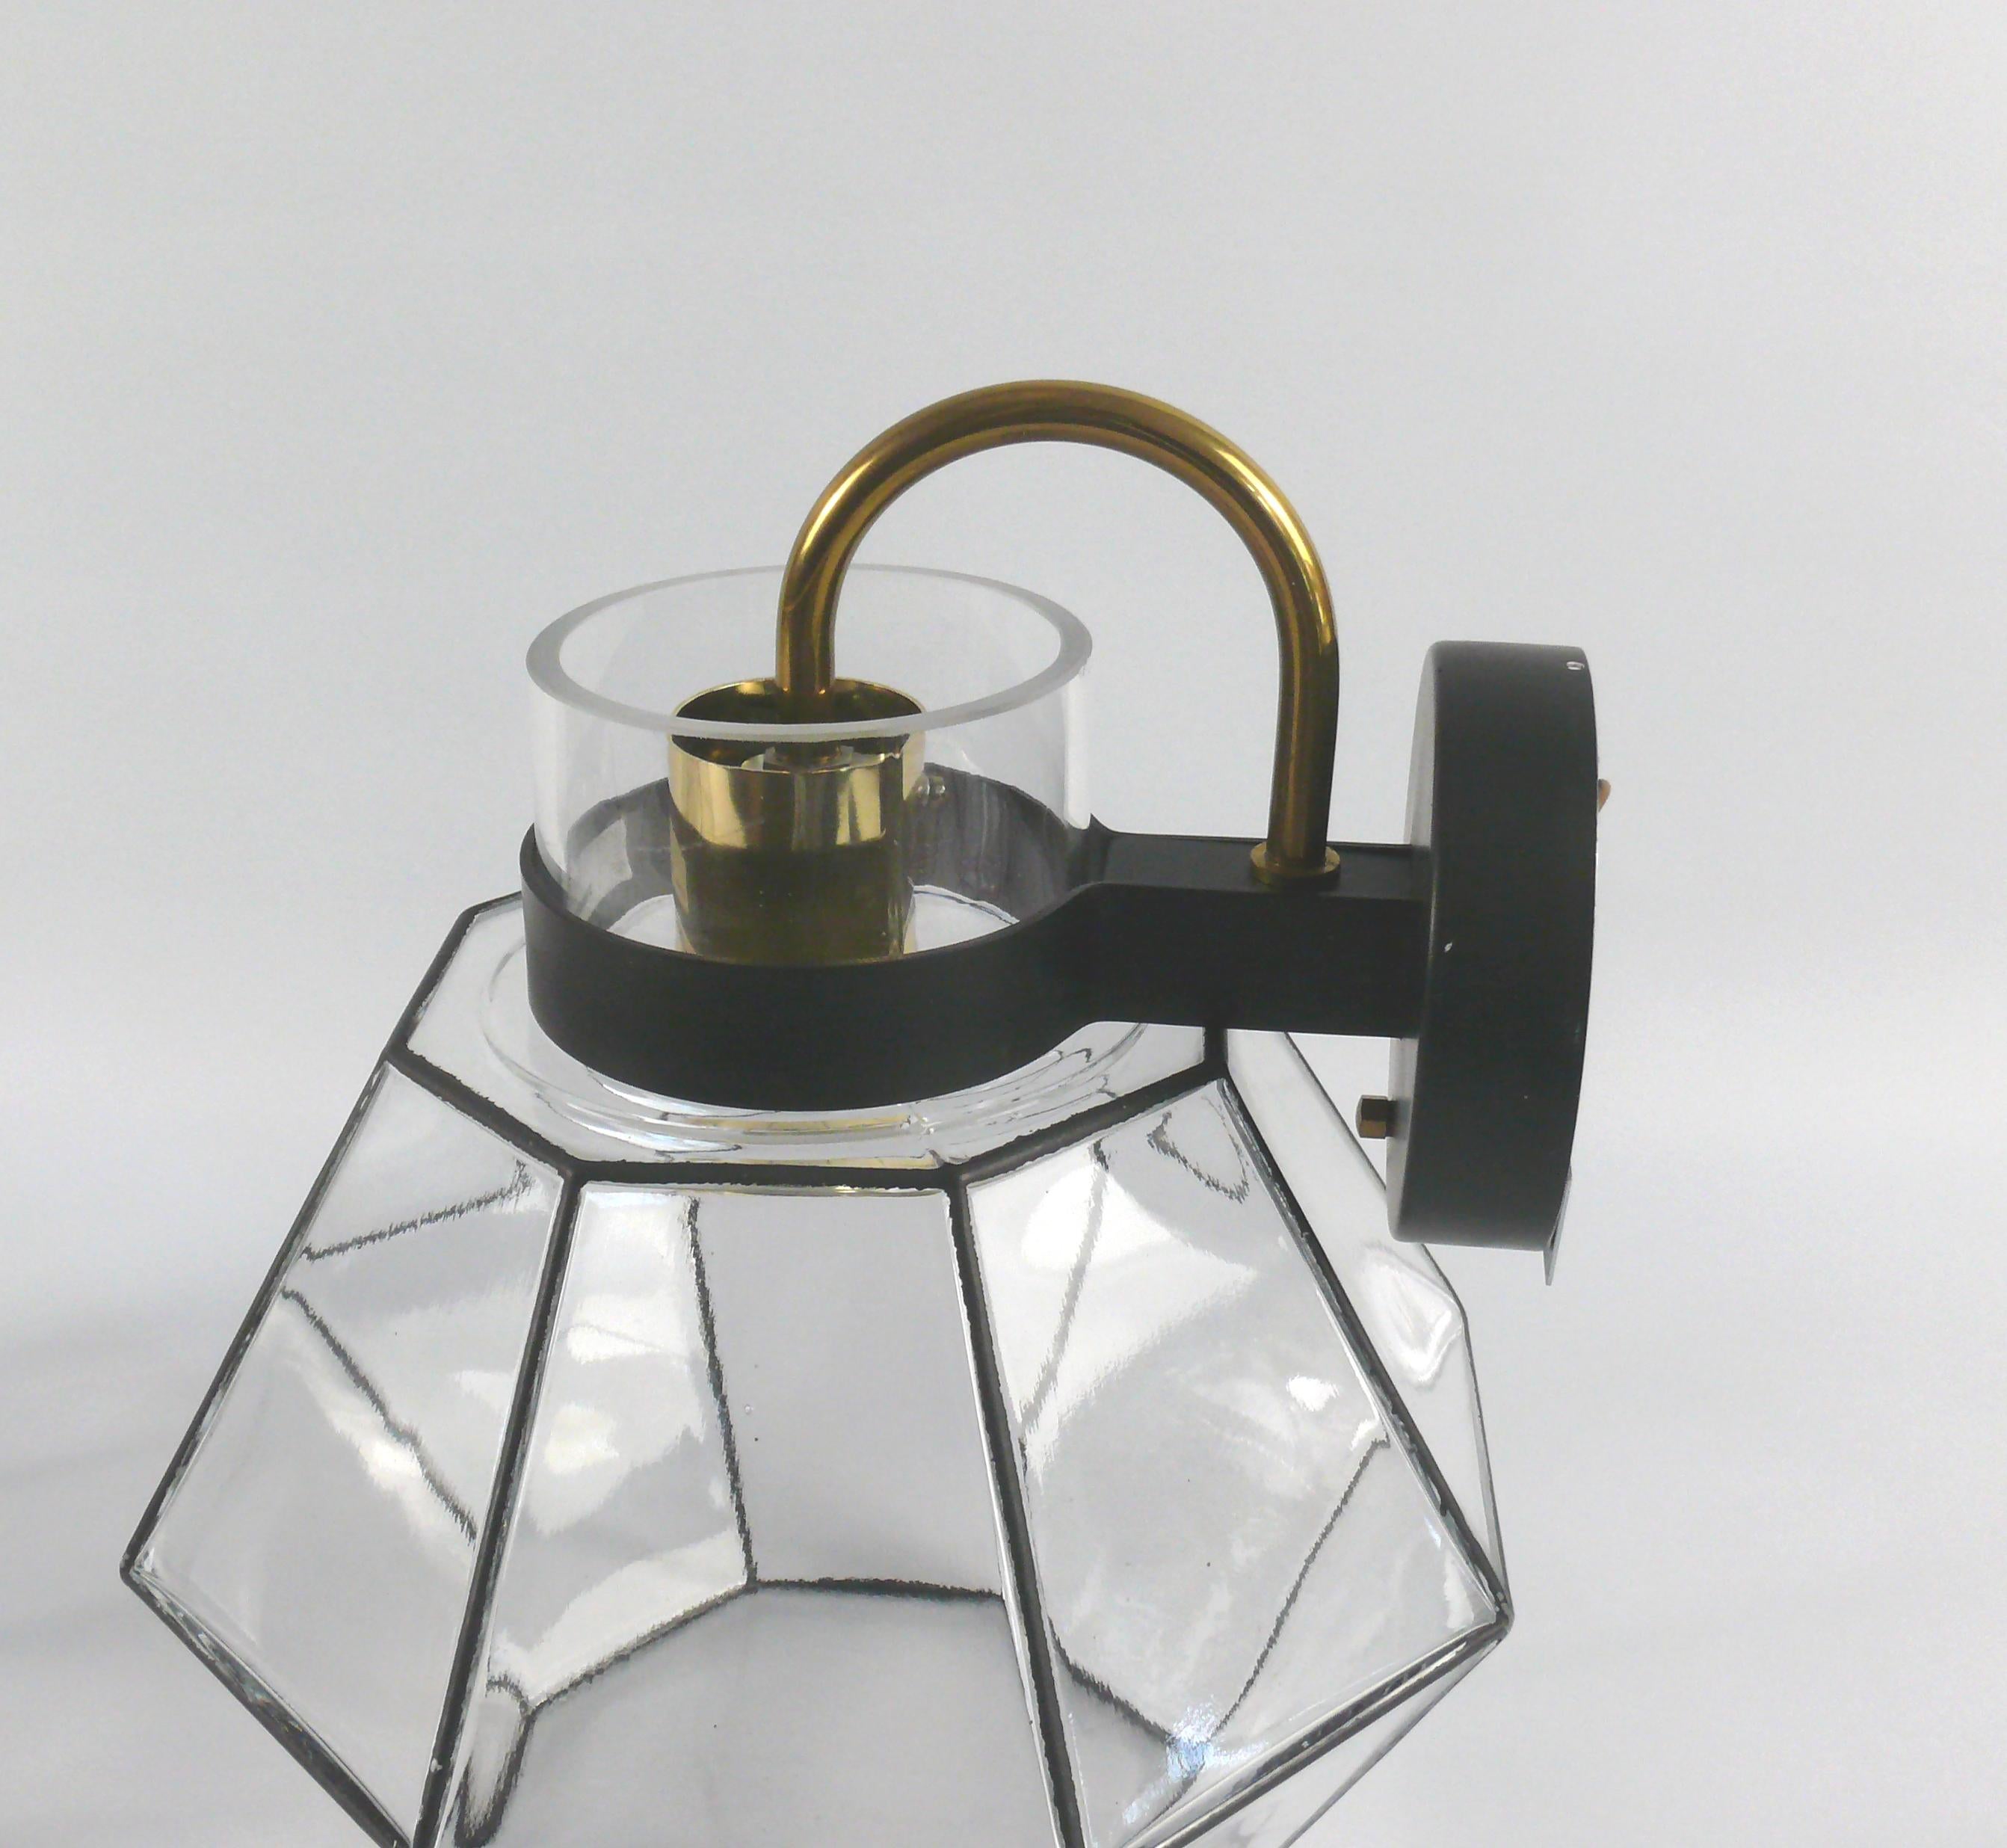 Set of wall lights by the company Glashütte Limburg from the period 1970-1979. The lights are characterized by a high quality of manufacture and a minimalist design. The octagonal glass is visually divided into individual panes. The bracket is made